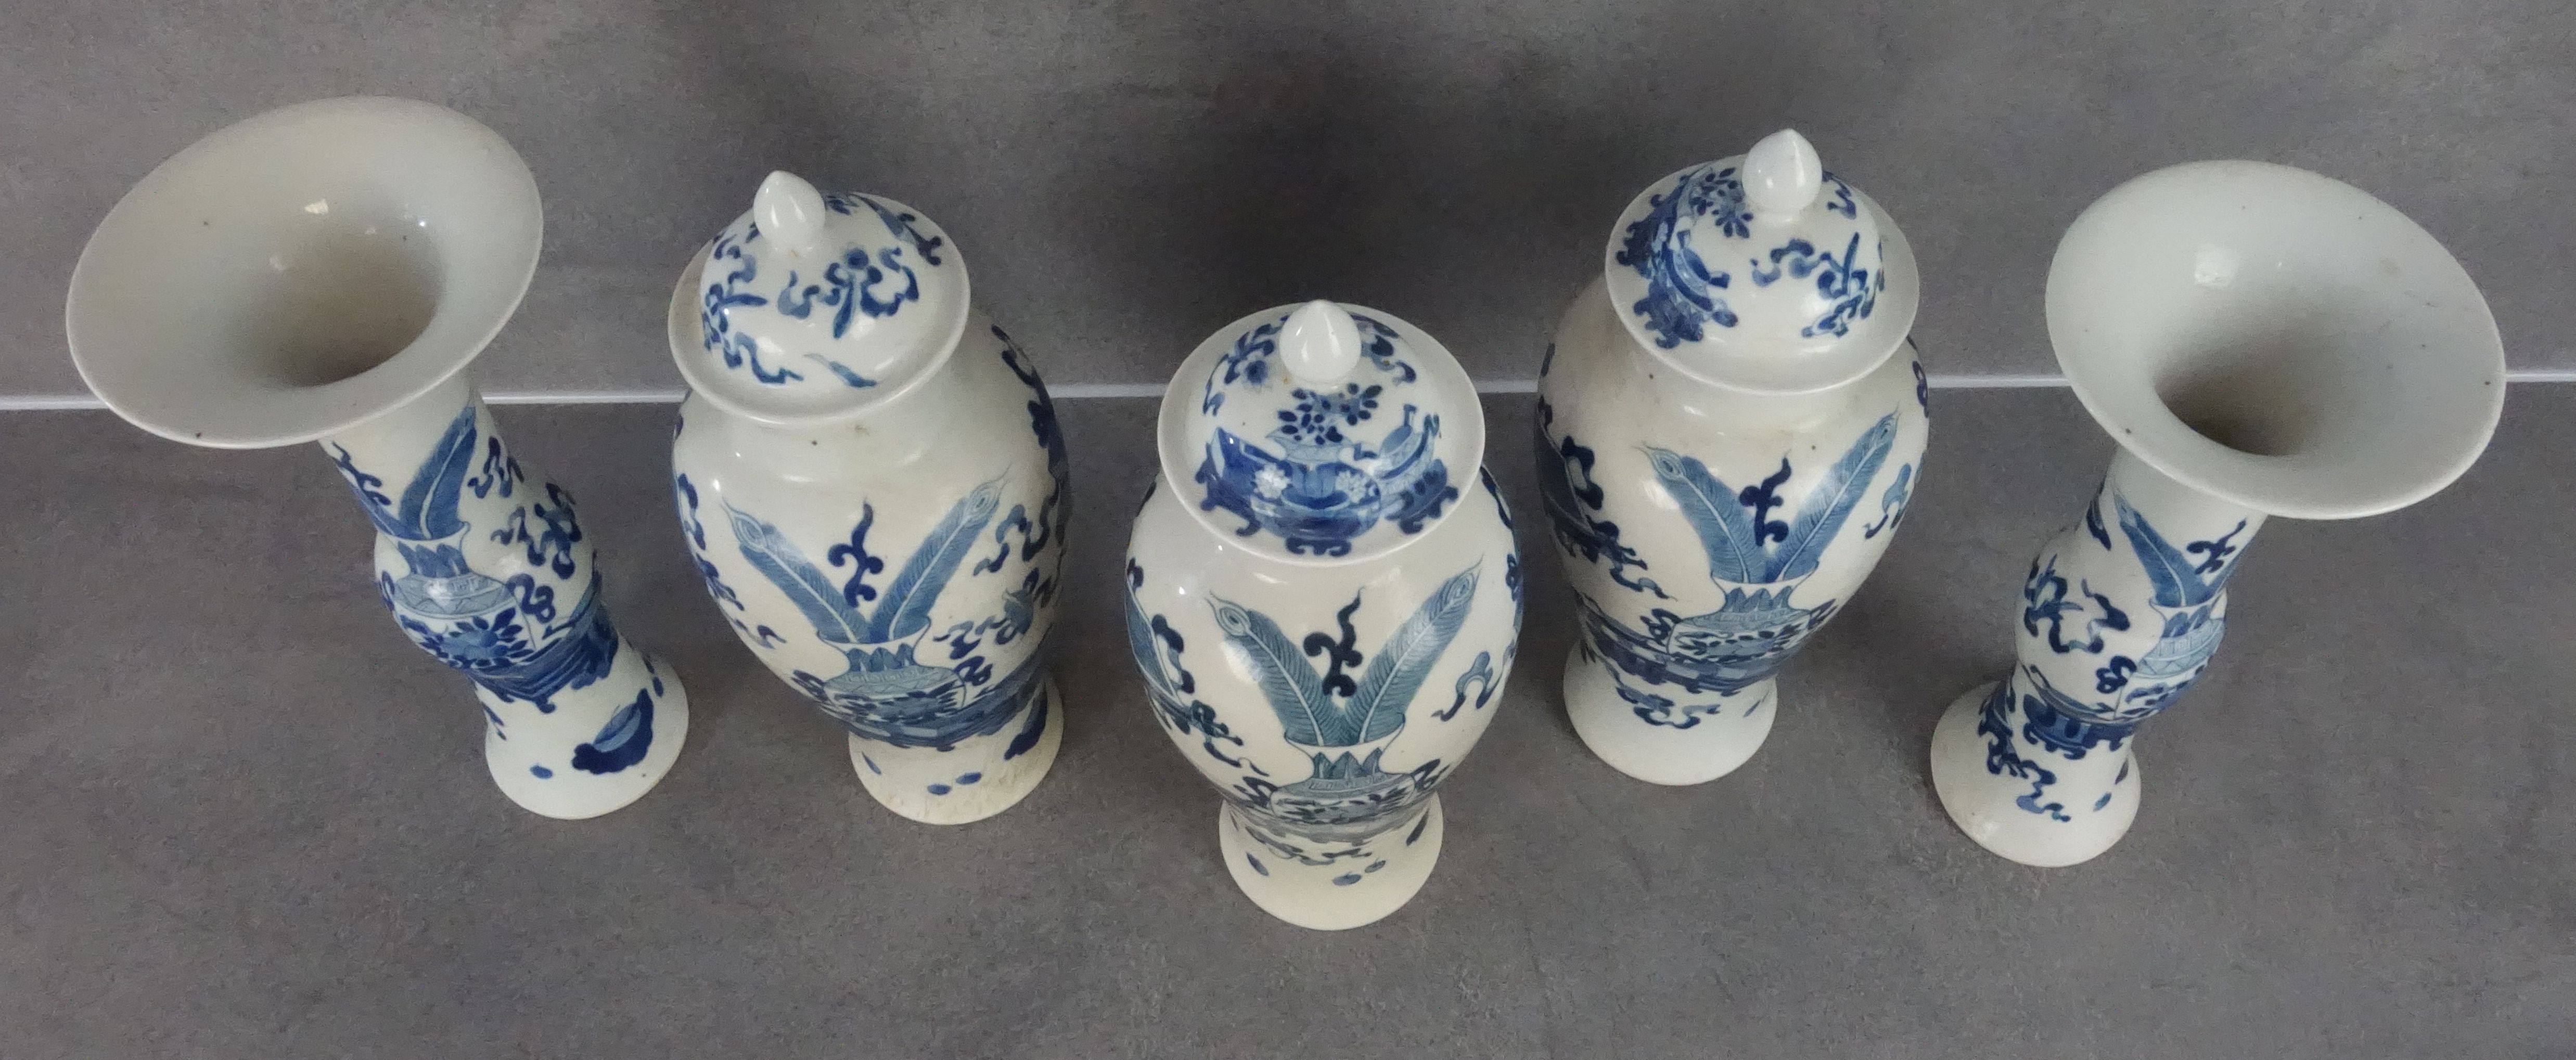 SET OF 5 CHINESE VASES - Image 2 of 3